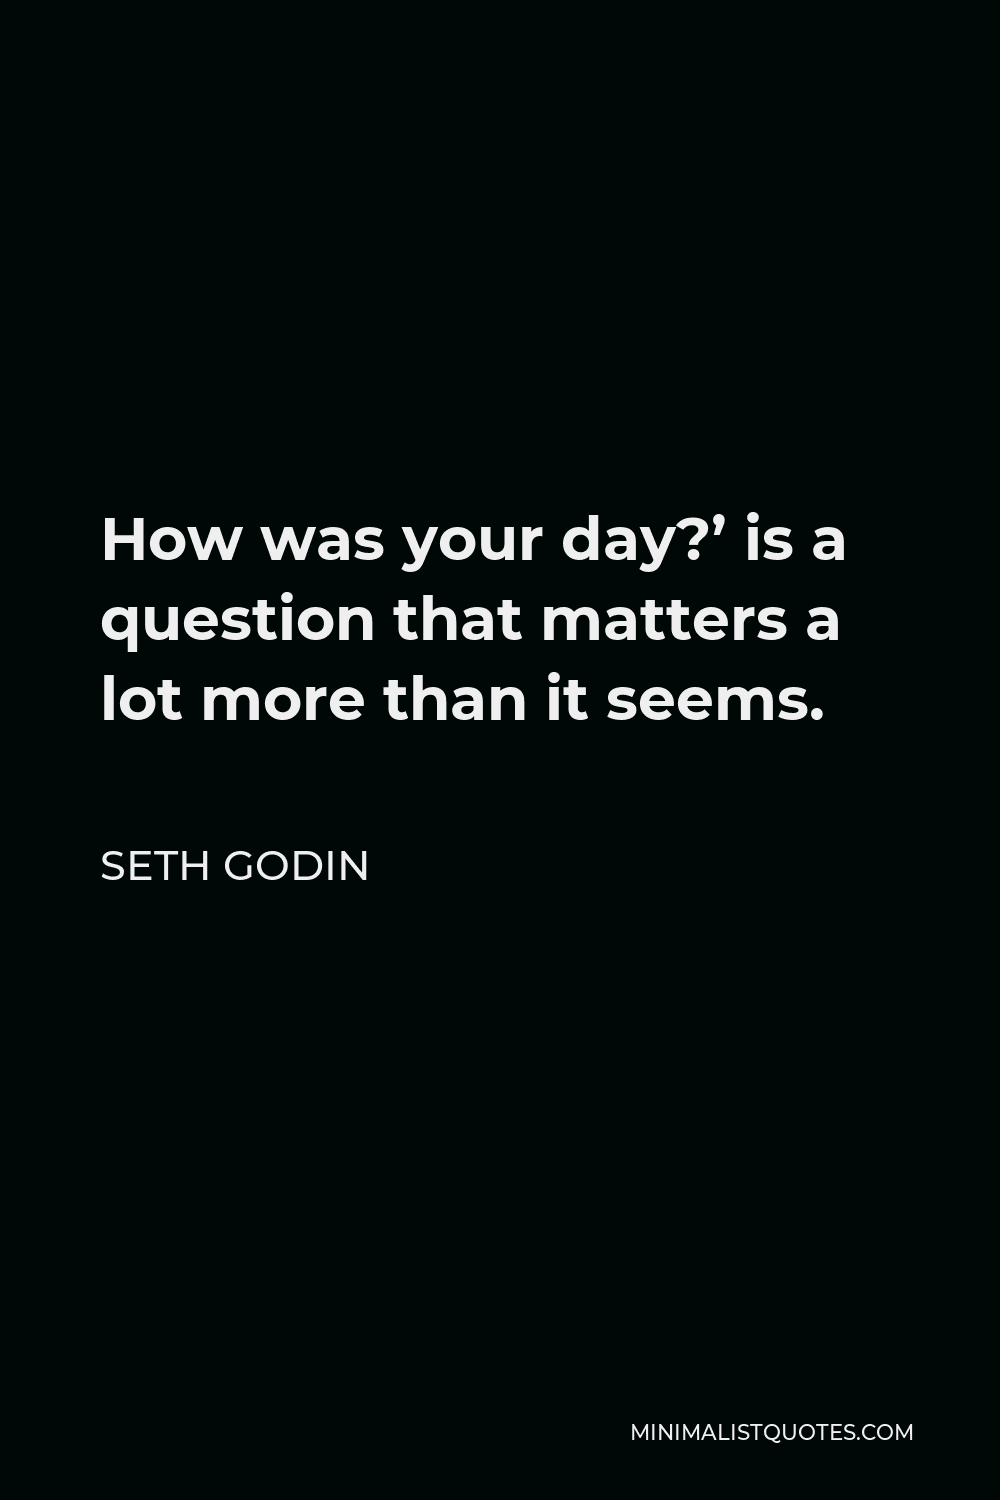 Seth Godin Quote - How was your day?’ is a question that matters a lot more than it seems.